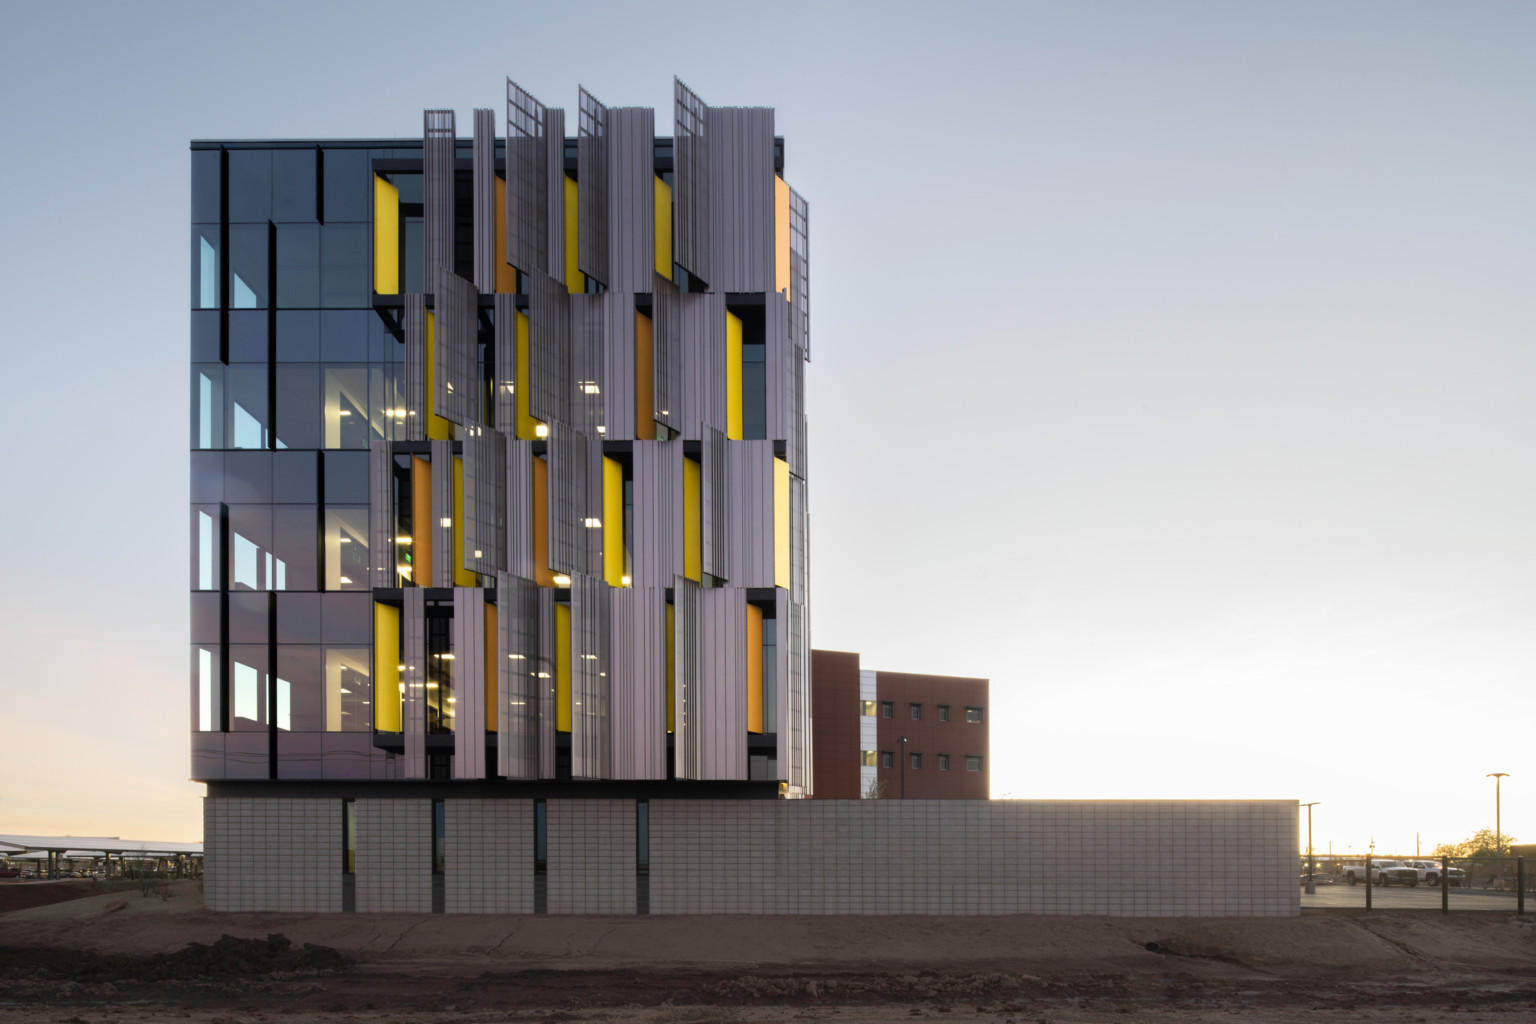 side view of courthouse with serrated sunscreen facade, a pattern of yellow panels peaking between. Floor to ceiling windows